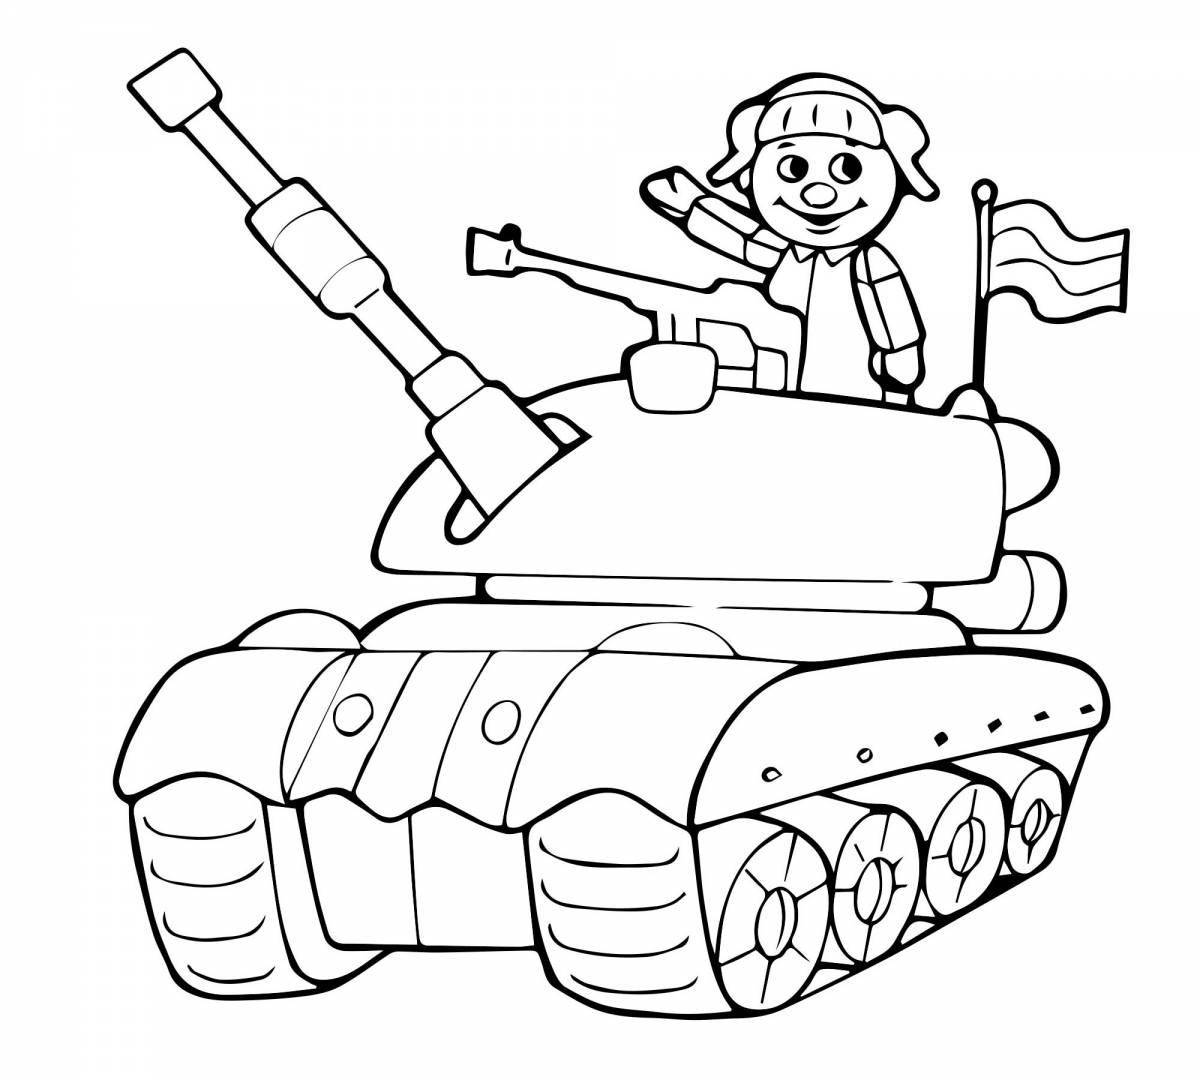 Great soldier and tank coloring book